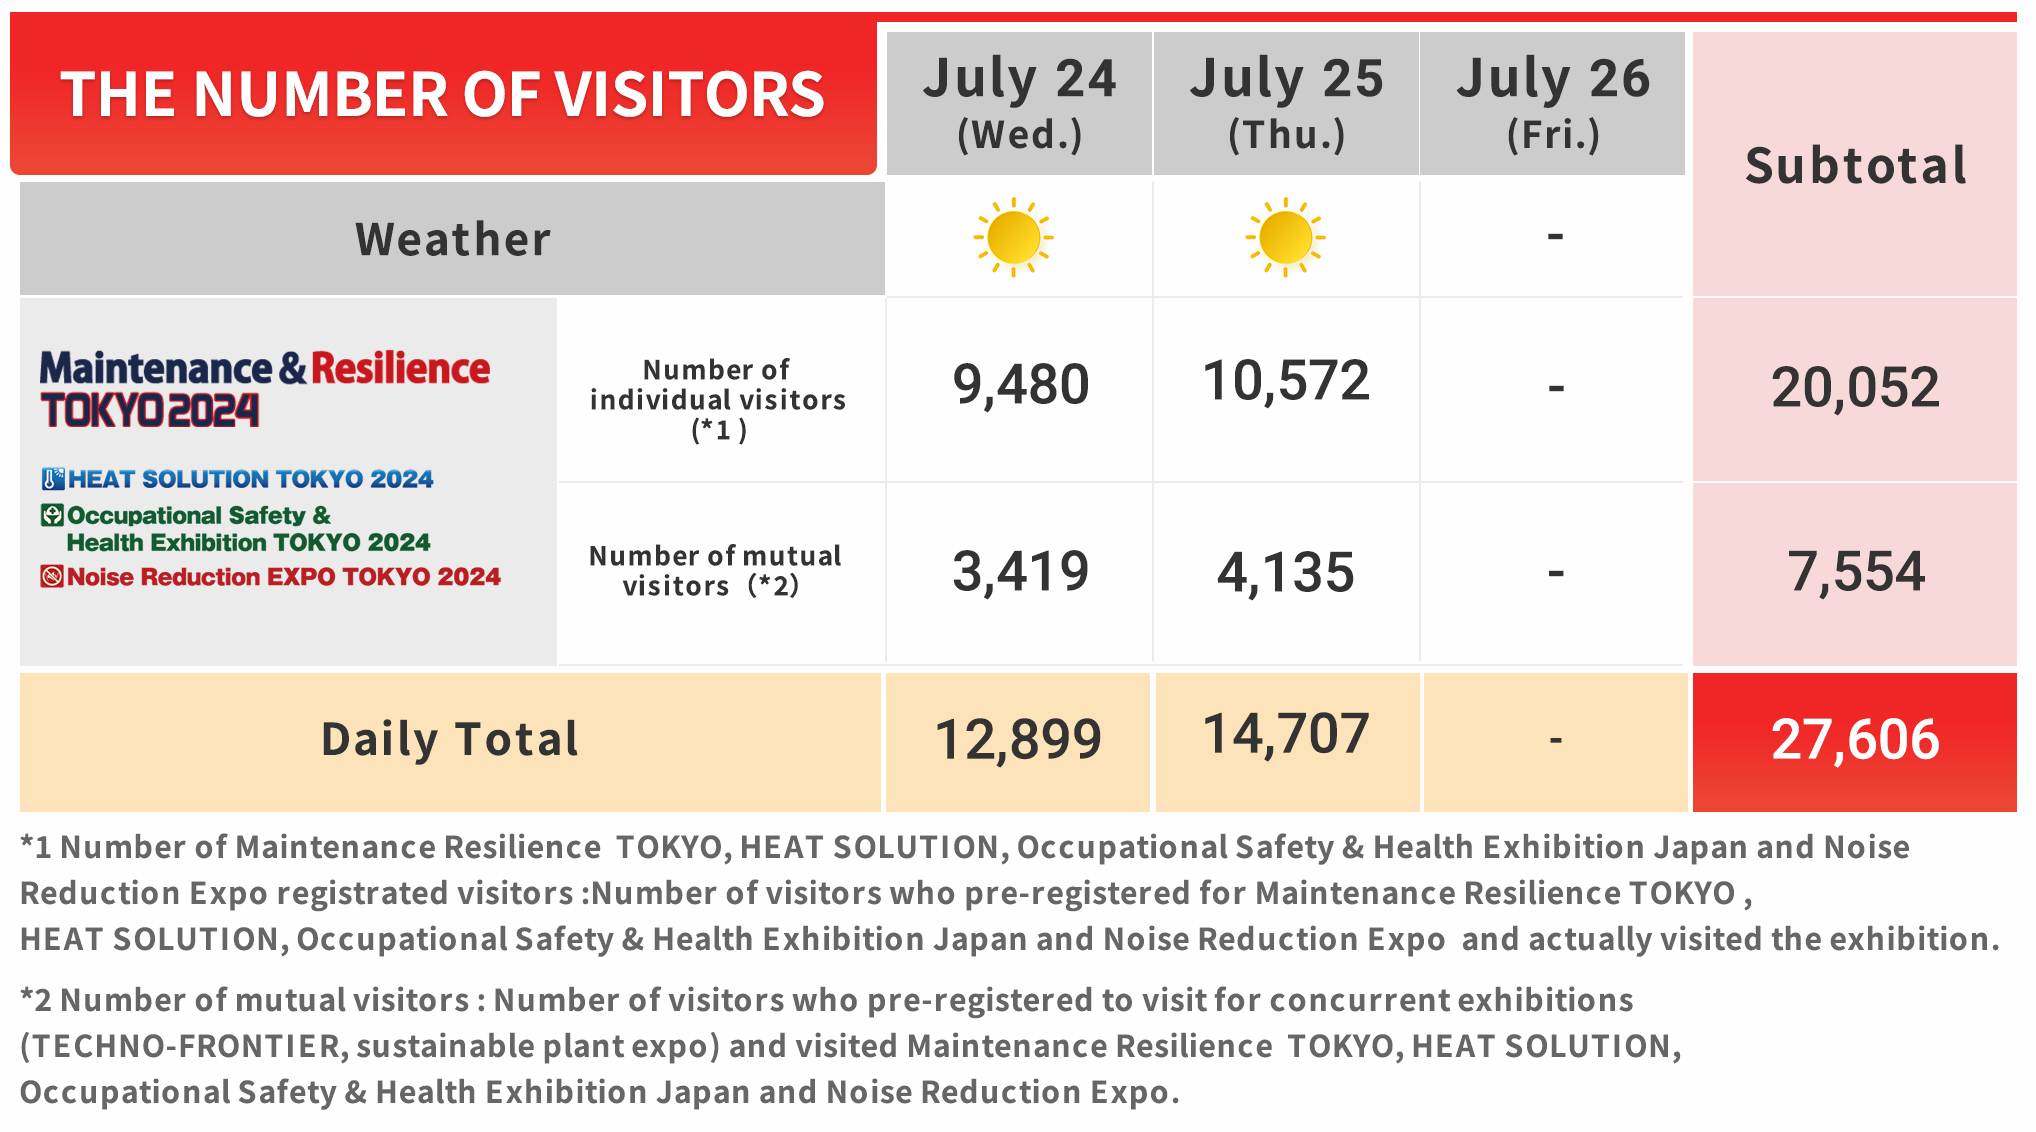 THE NUMBER OF VISITORS